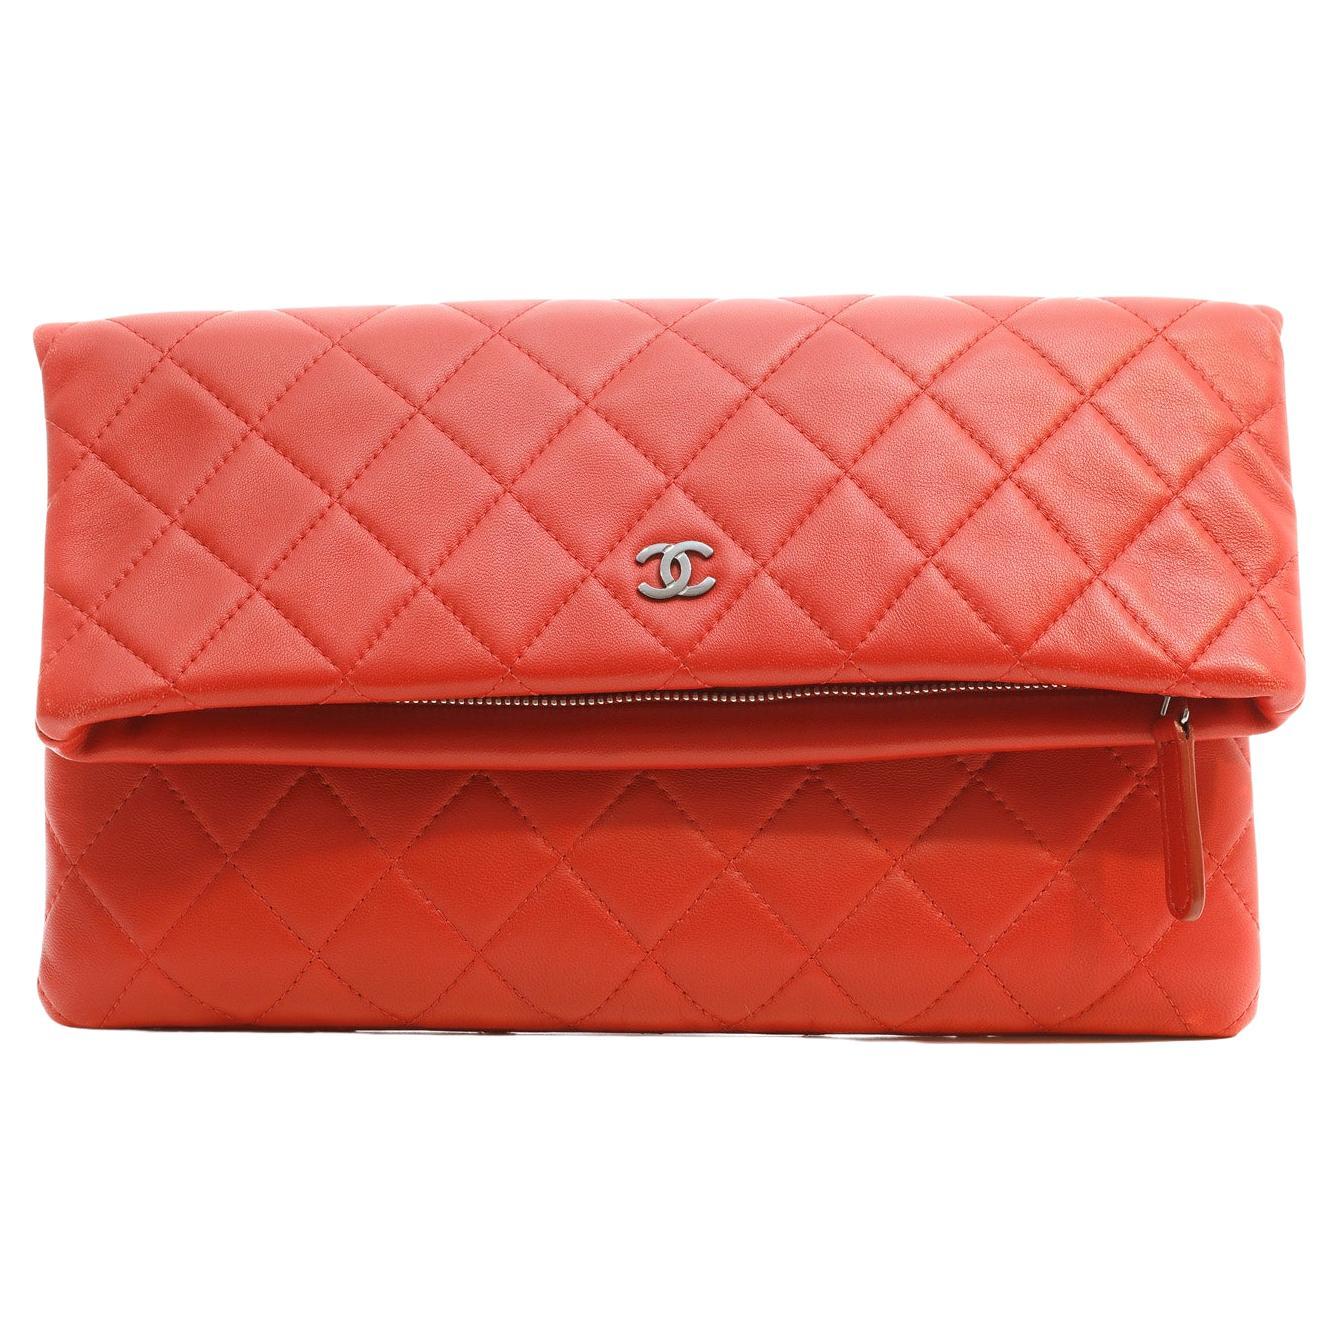 Chanel Red Quilted Lambskin Foldover Clutch 